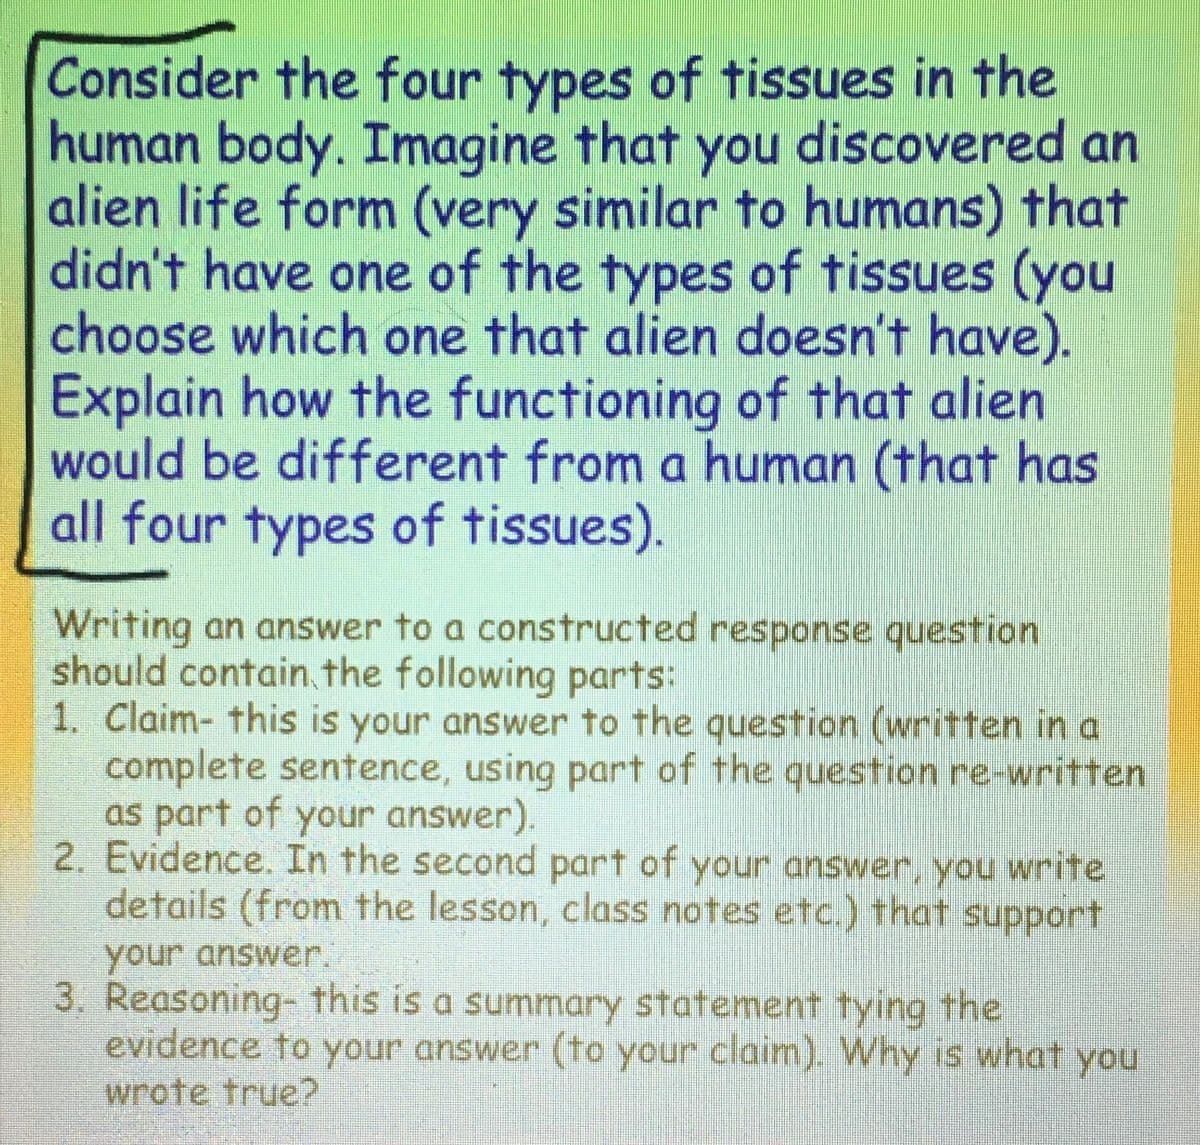 Consider the four types of tissues in the
human body. Imagine that you discovered an
alien life form (very similar to humans) that
didn't have one of the types of tissues (you
choose which one that alien doesn't have).
Explain how the functioning of that alien
would be different from a human (that has
all four types of tissues).
Writing an answer to a constructed response question
should contain the following parts:
1. Claim- this is your answer to the question (written in a
complete sentence, using part of the question re-written
as part of your answer).
2. Evidence. In the second part of your answer, you write
details (from the lesson, class notes etc.) that support
your answer.
3. Reasoning- this is a summary statement tying the
evidence to your answer (to your claim). Why is what you
wrote true?